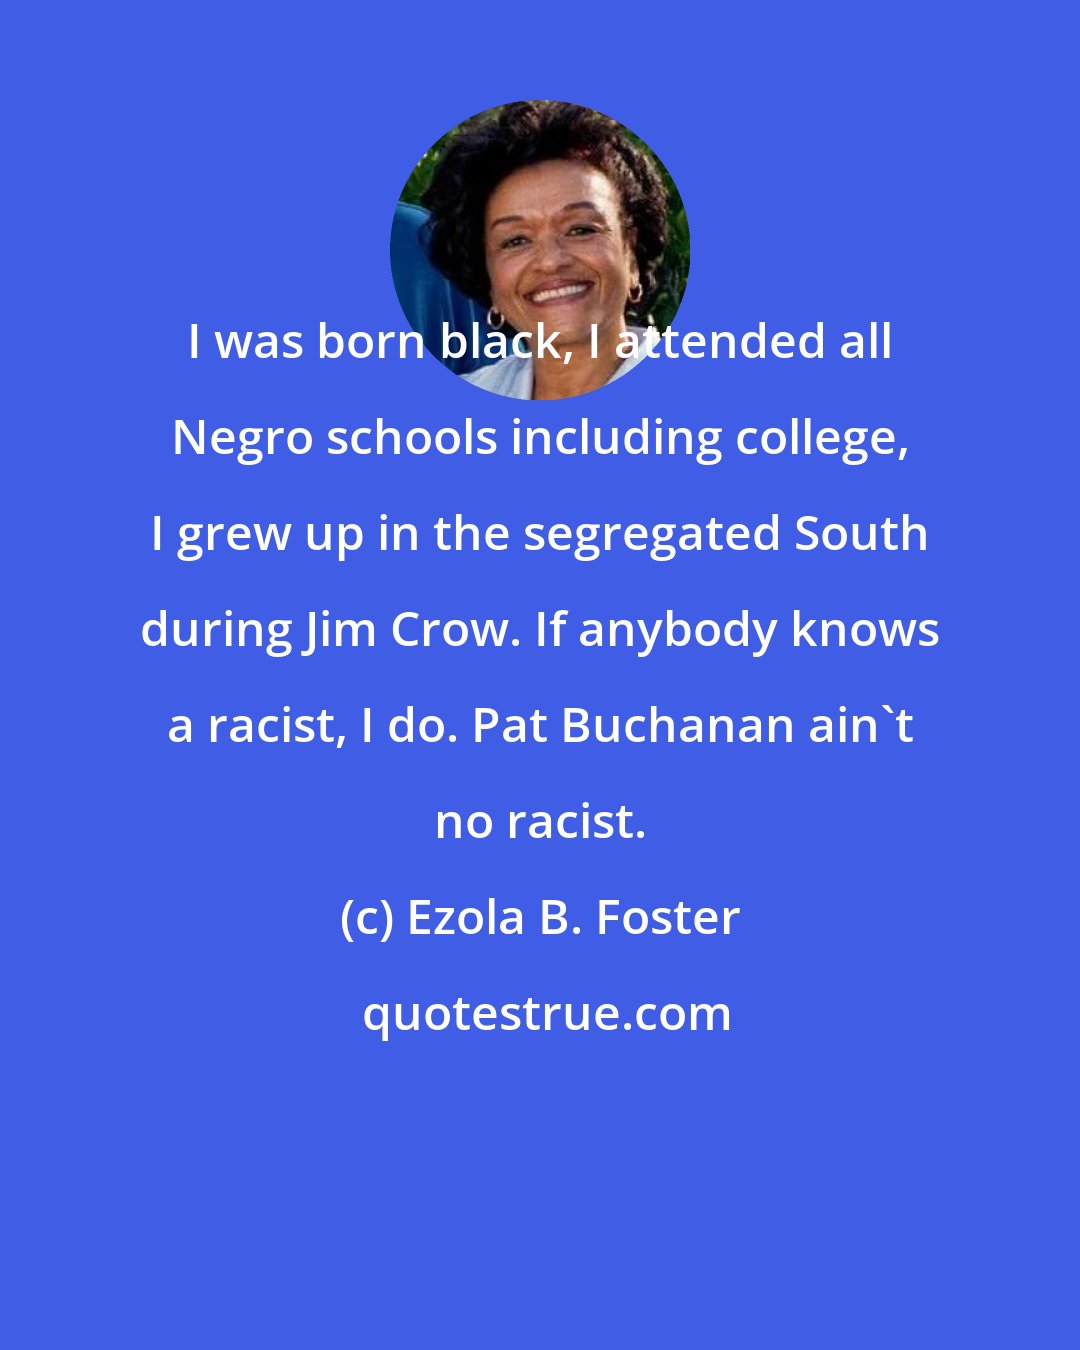 Ezola B. Foster: I was born black, I attended all Negro schools including college, I grew up in the segregated South during Jim Crow. If anybody knows a racist, I do. Pat Buchanan ain't no racist.